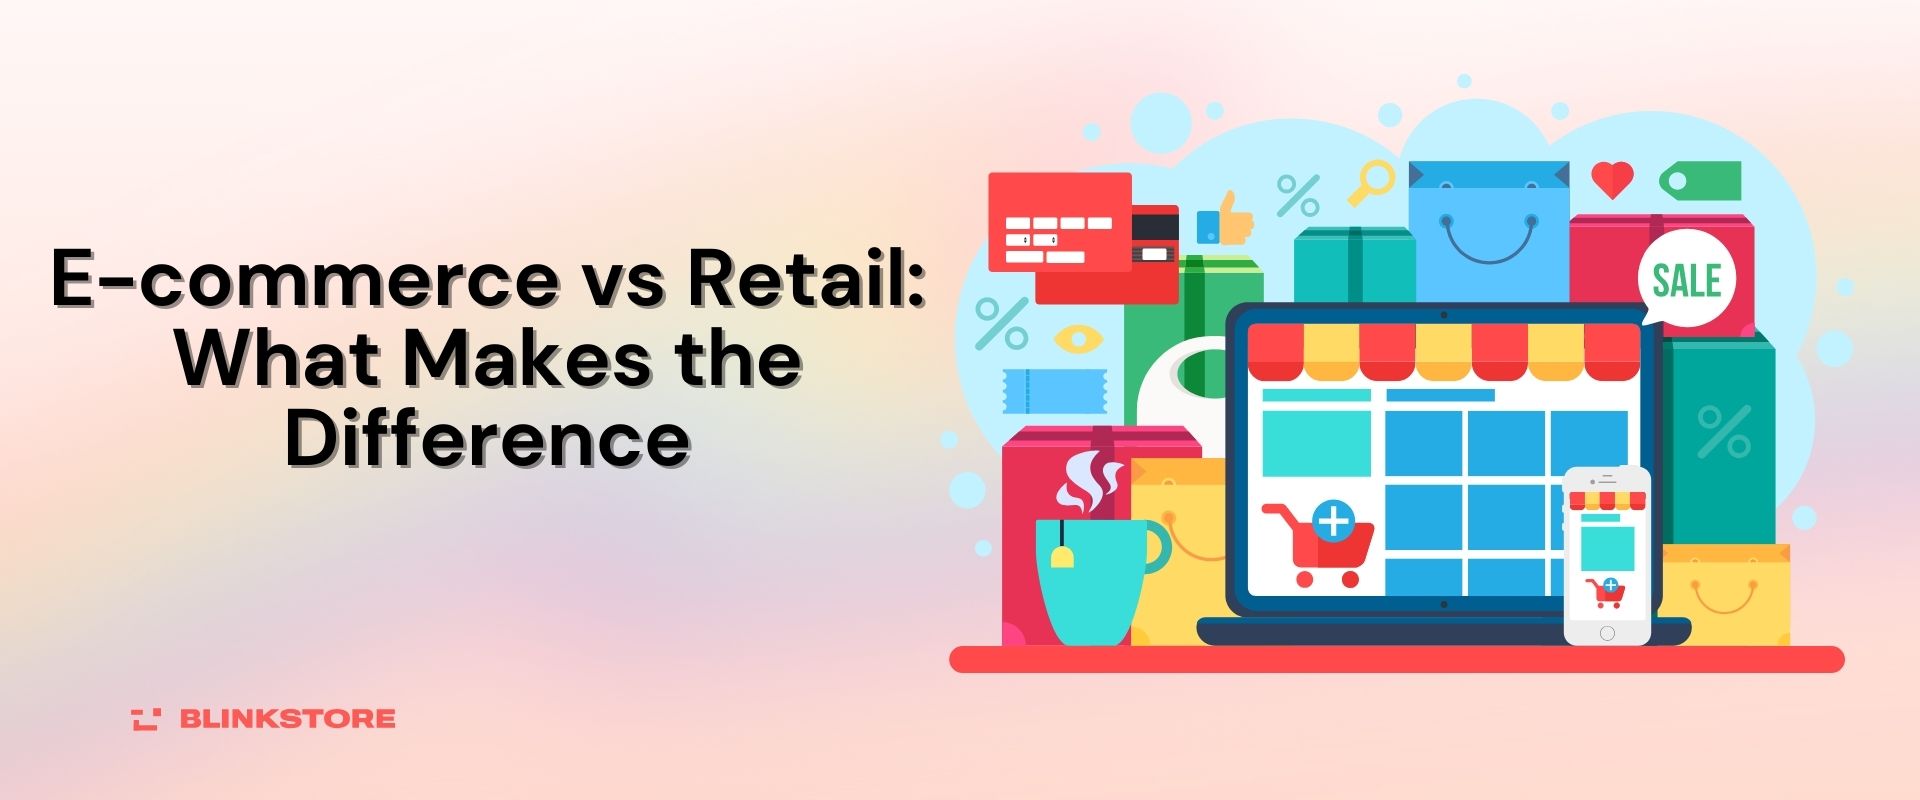 E-commerce vs Retail What Makes the Difference